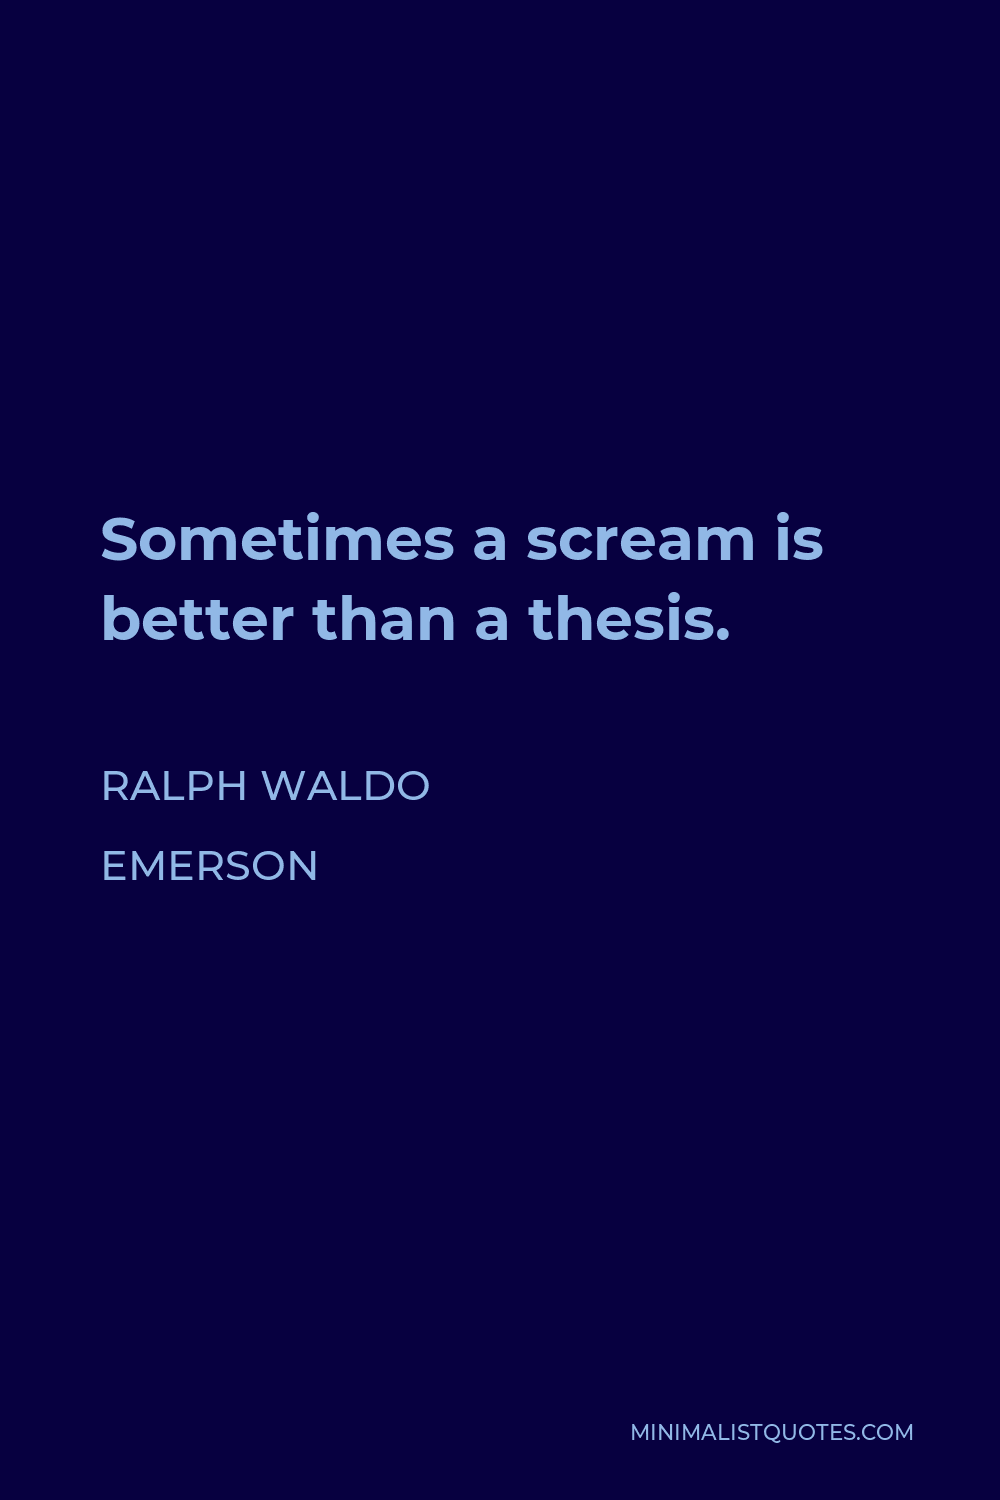 Ralph Waldo Emerson Quote - Sometimes a scream is better than a thesis.